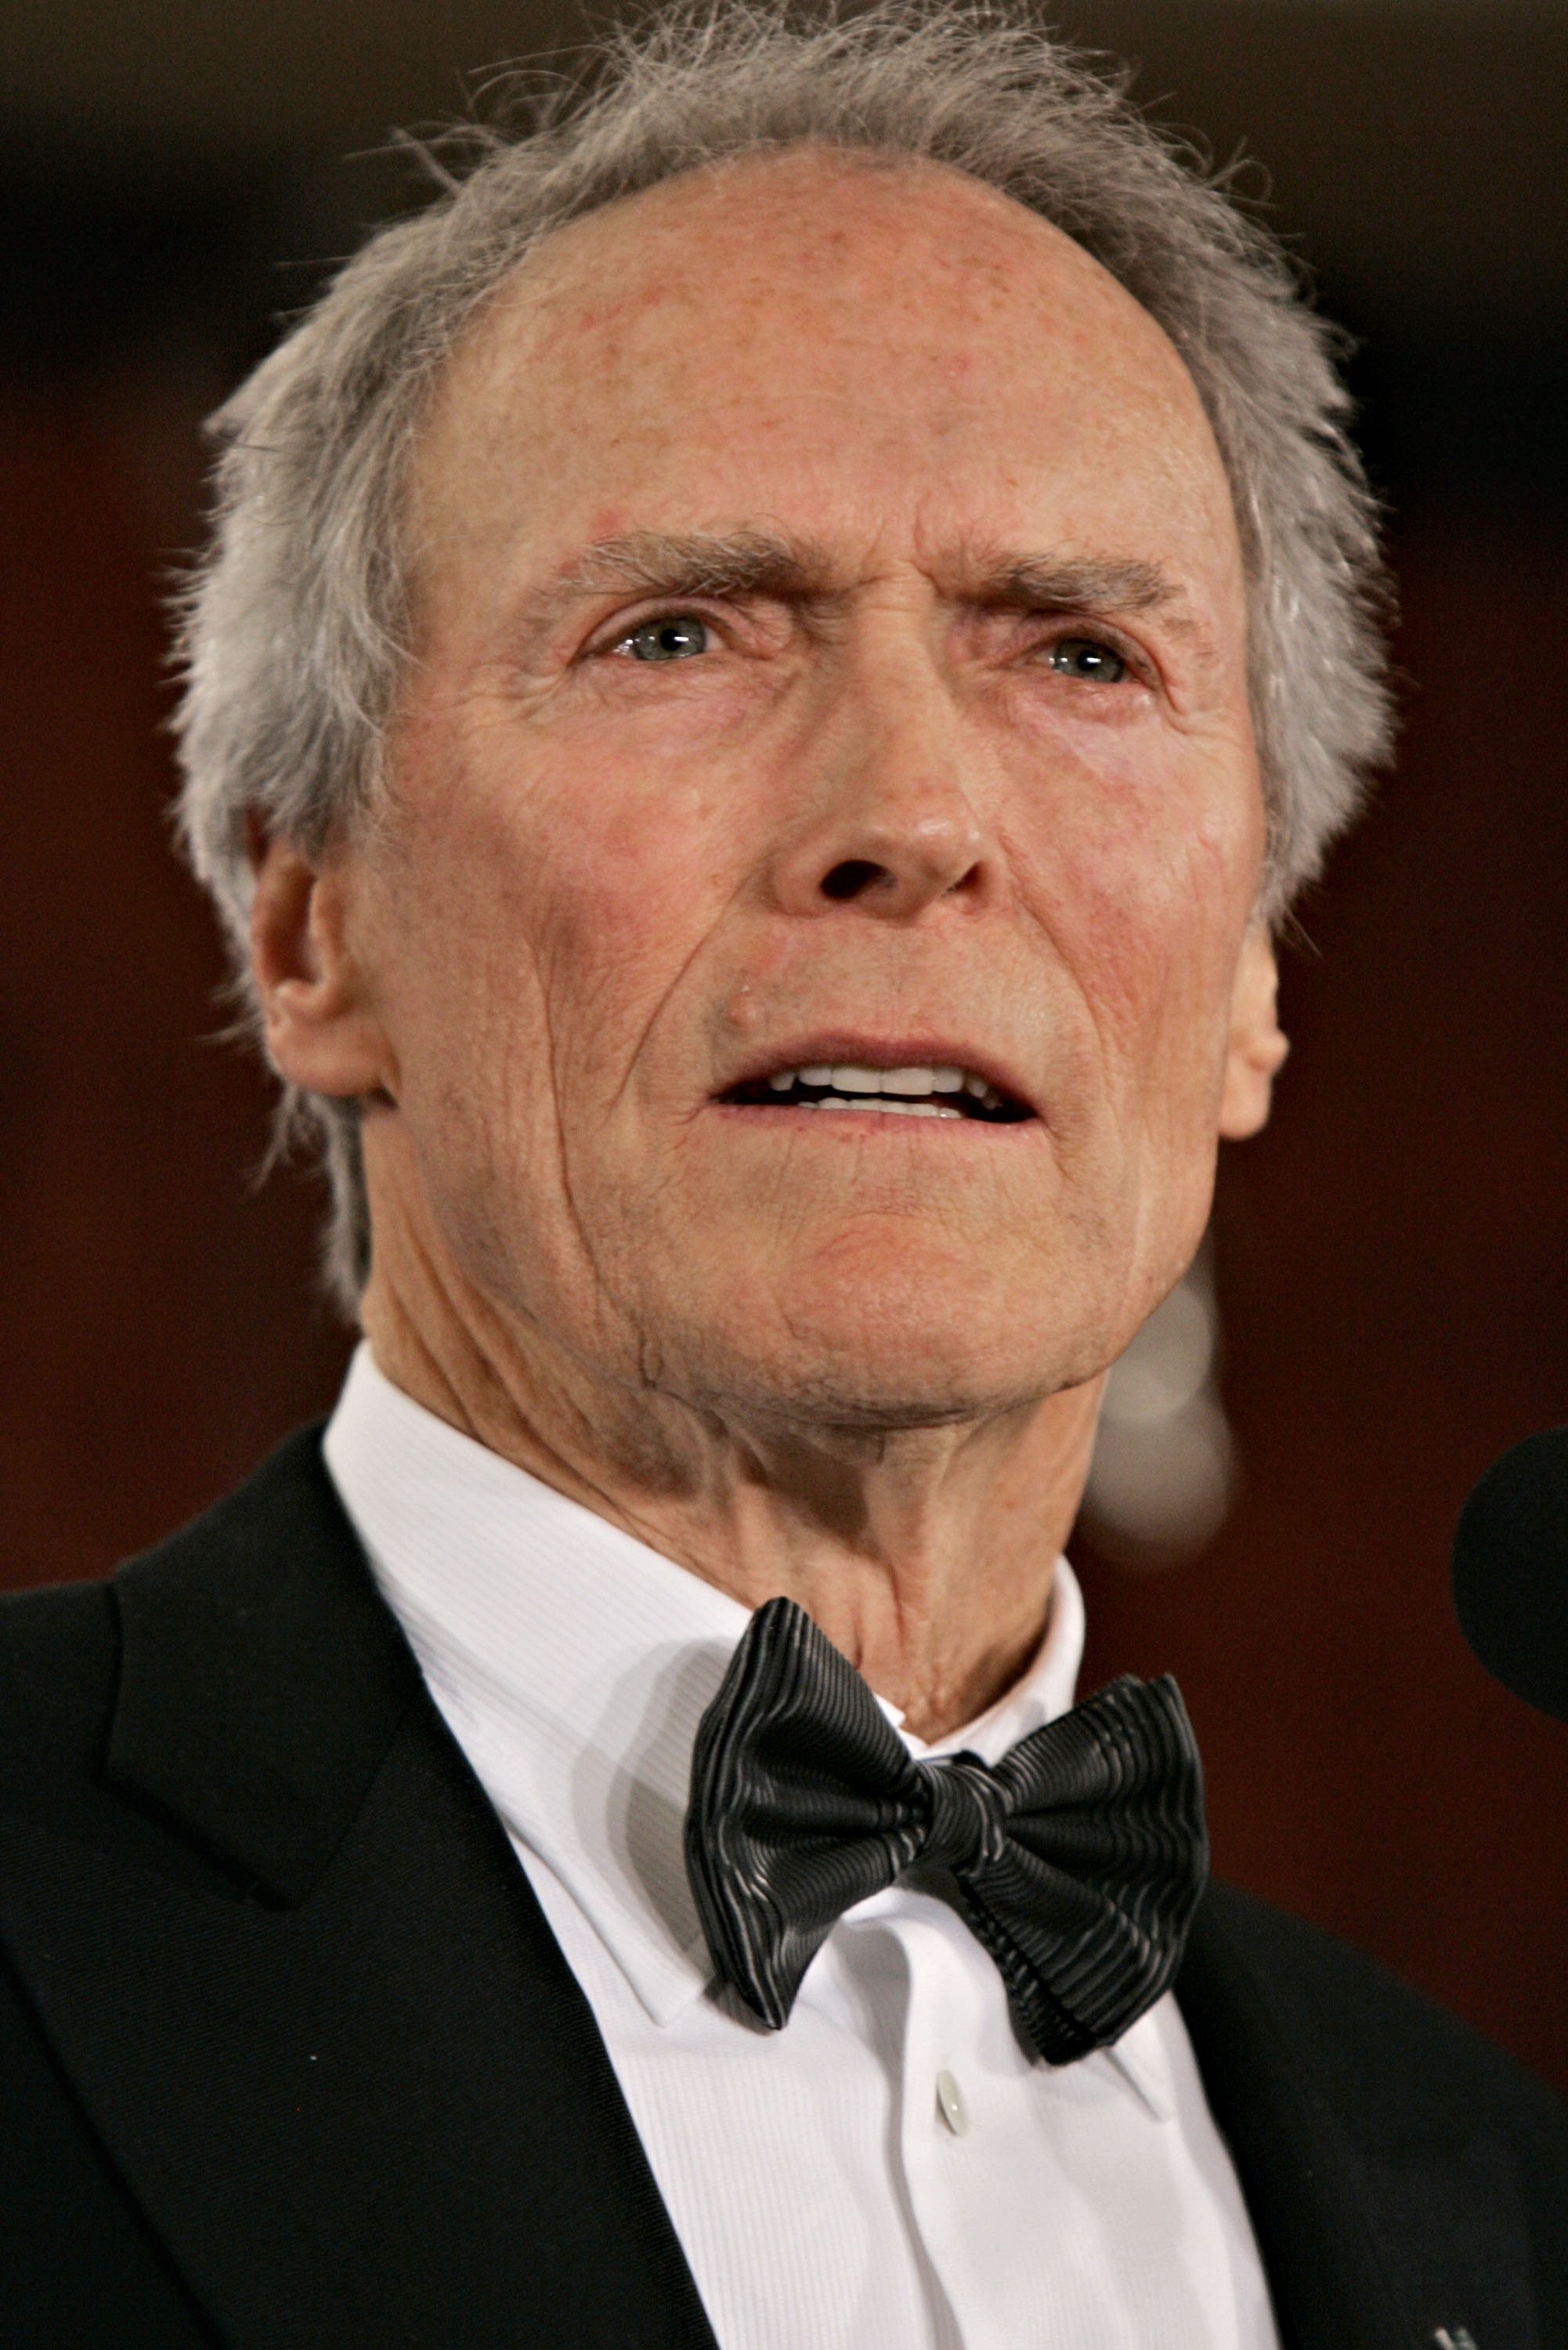 Clint Eastwood during the 58th Annual Directors Guild Of America Awards at Hyatt Regency Century Plaza on January 28, 2006 in Los Angeles, California | Photo: Getty Images